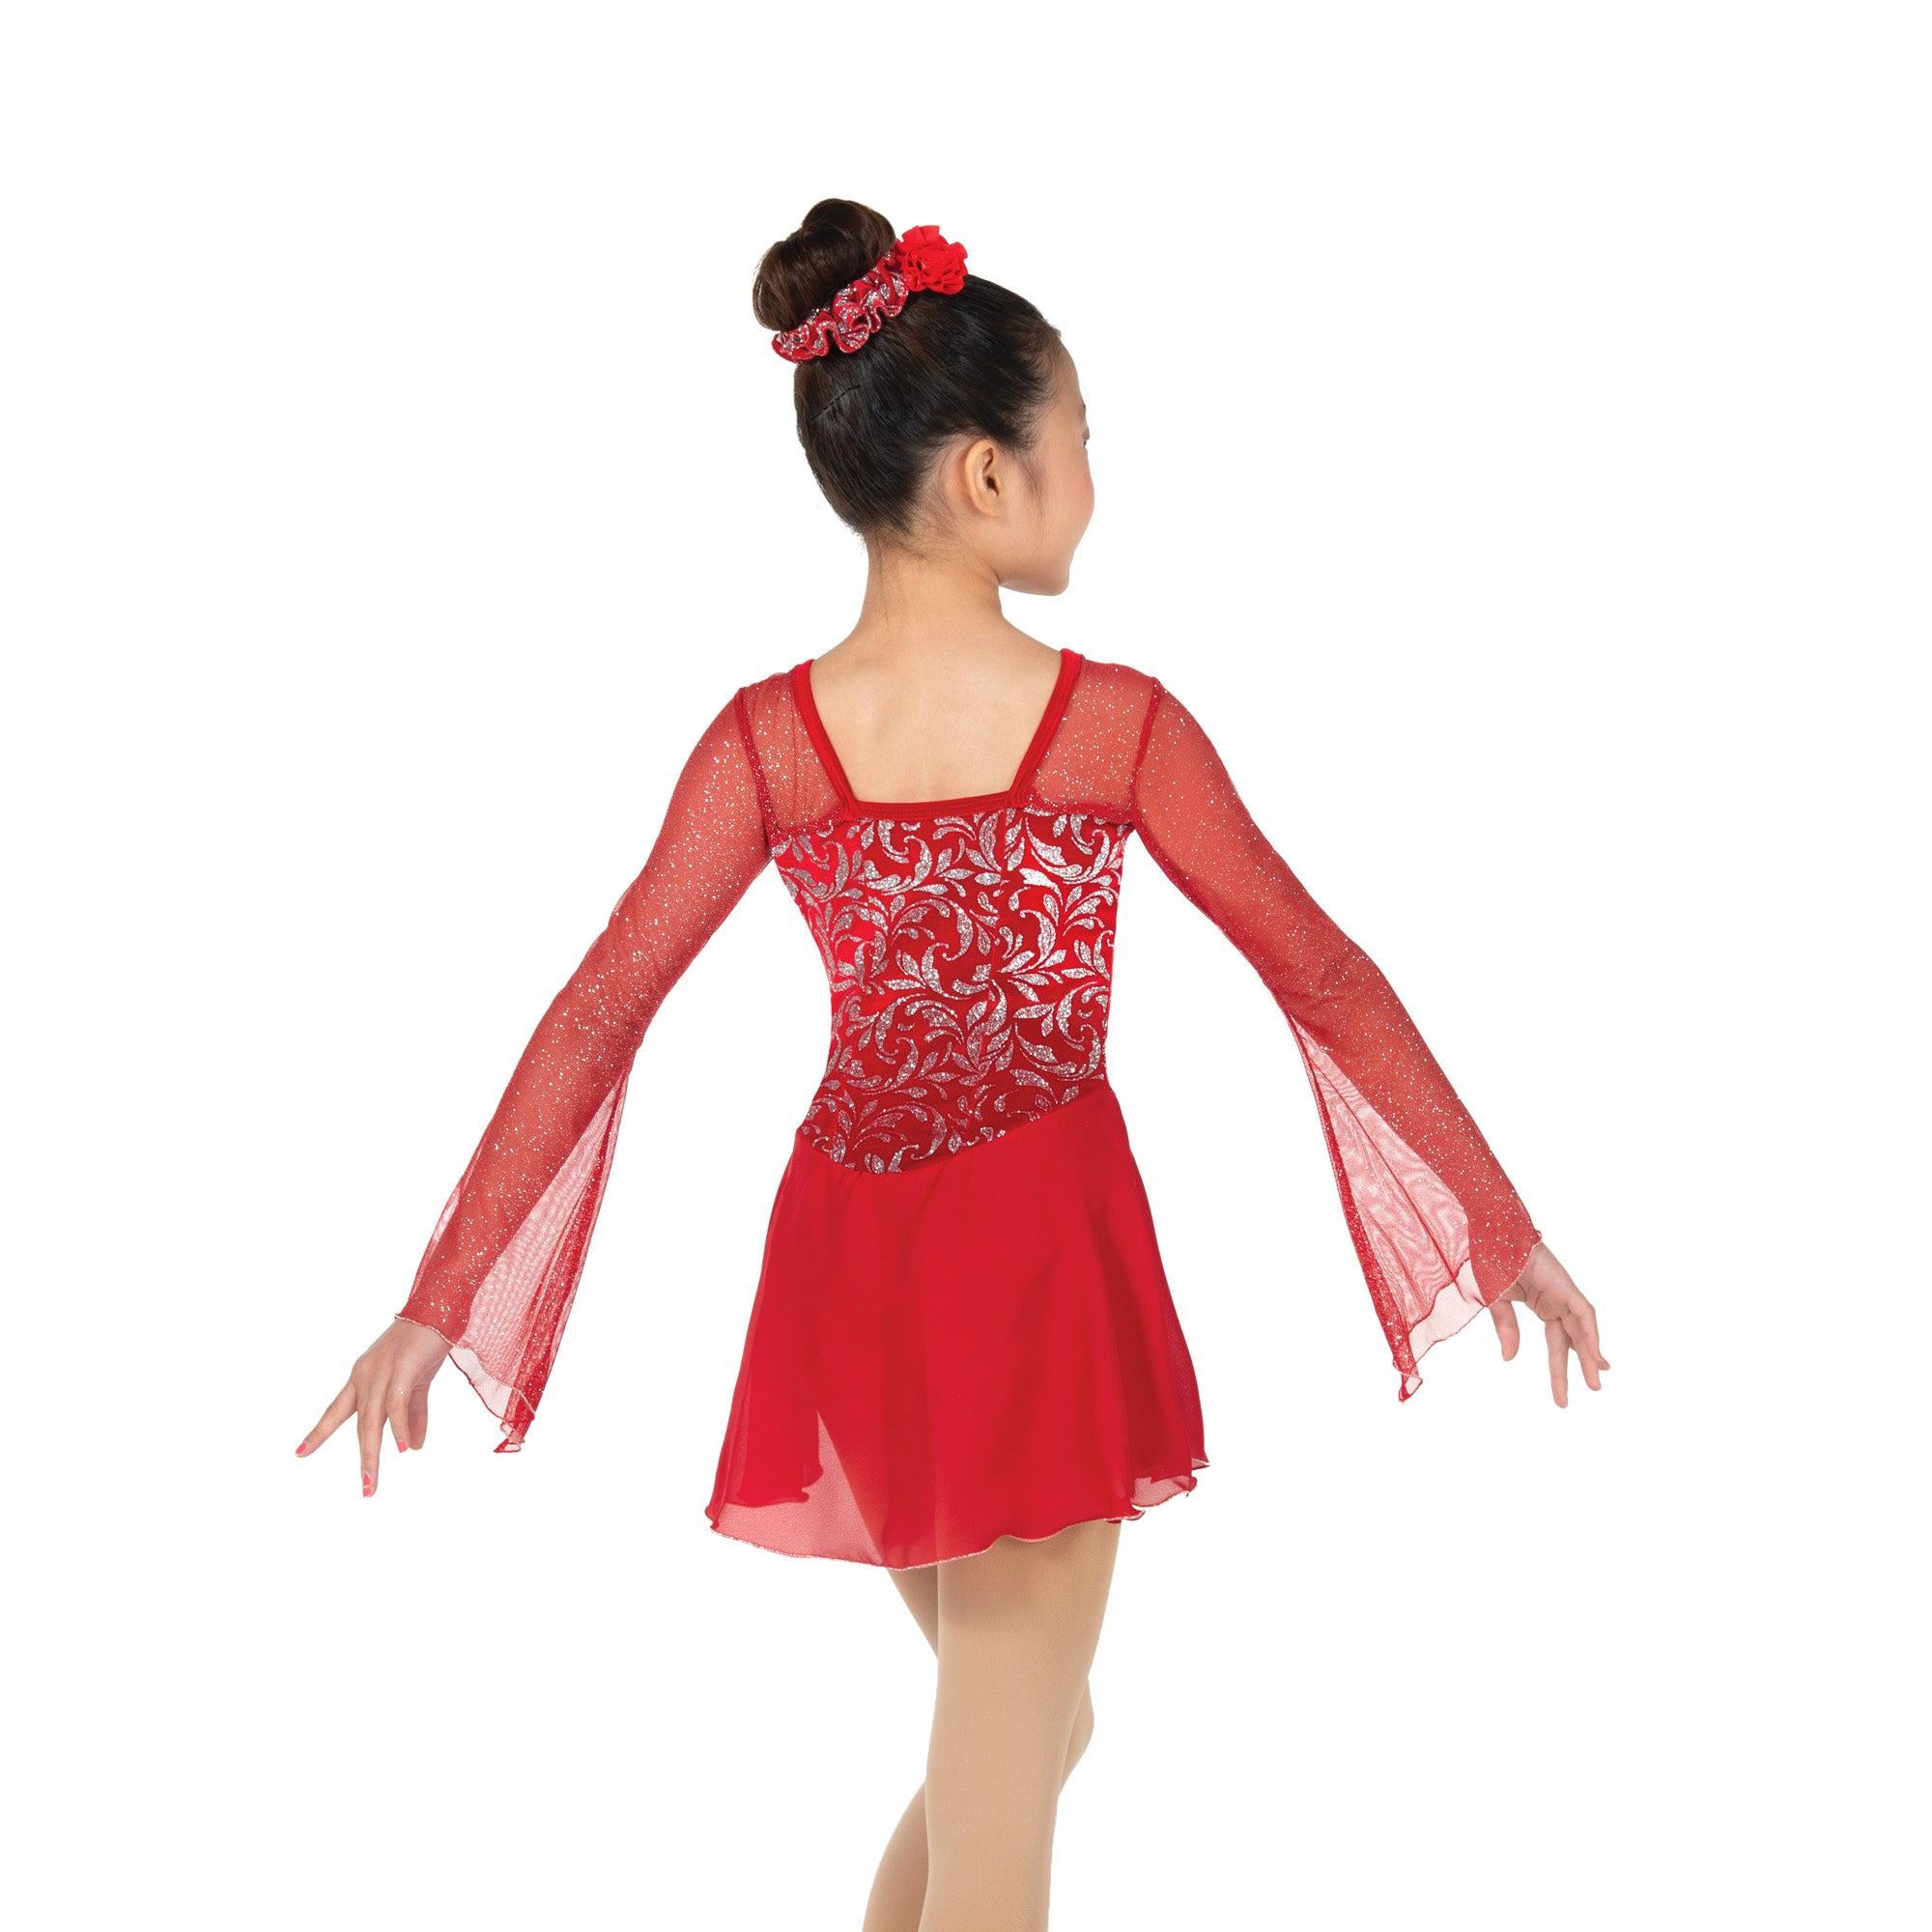 143 Fire Flare Skating Dress in by Jerry's